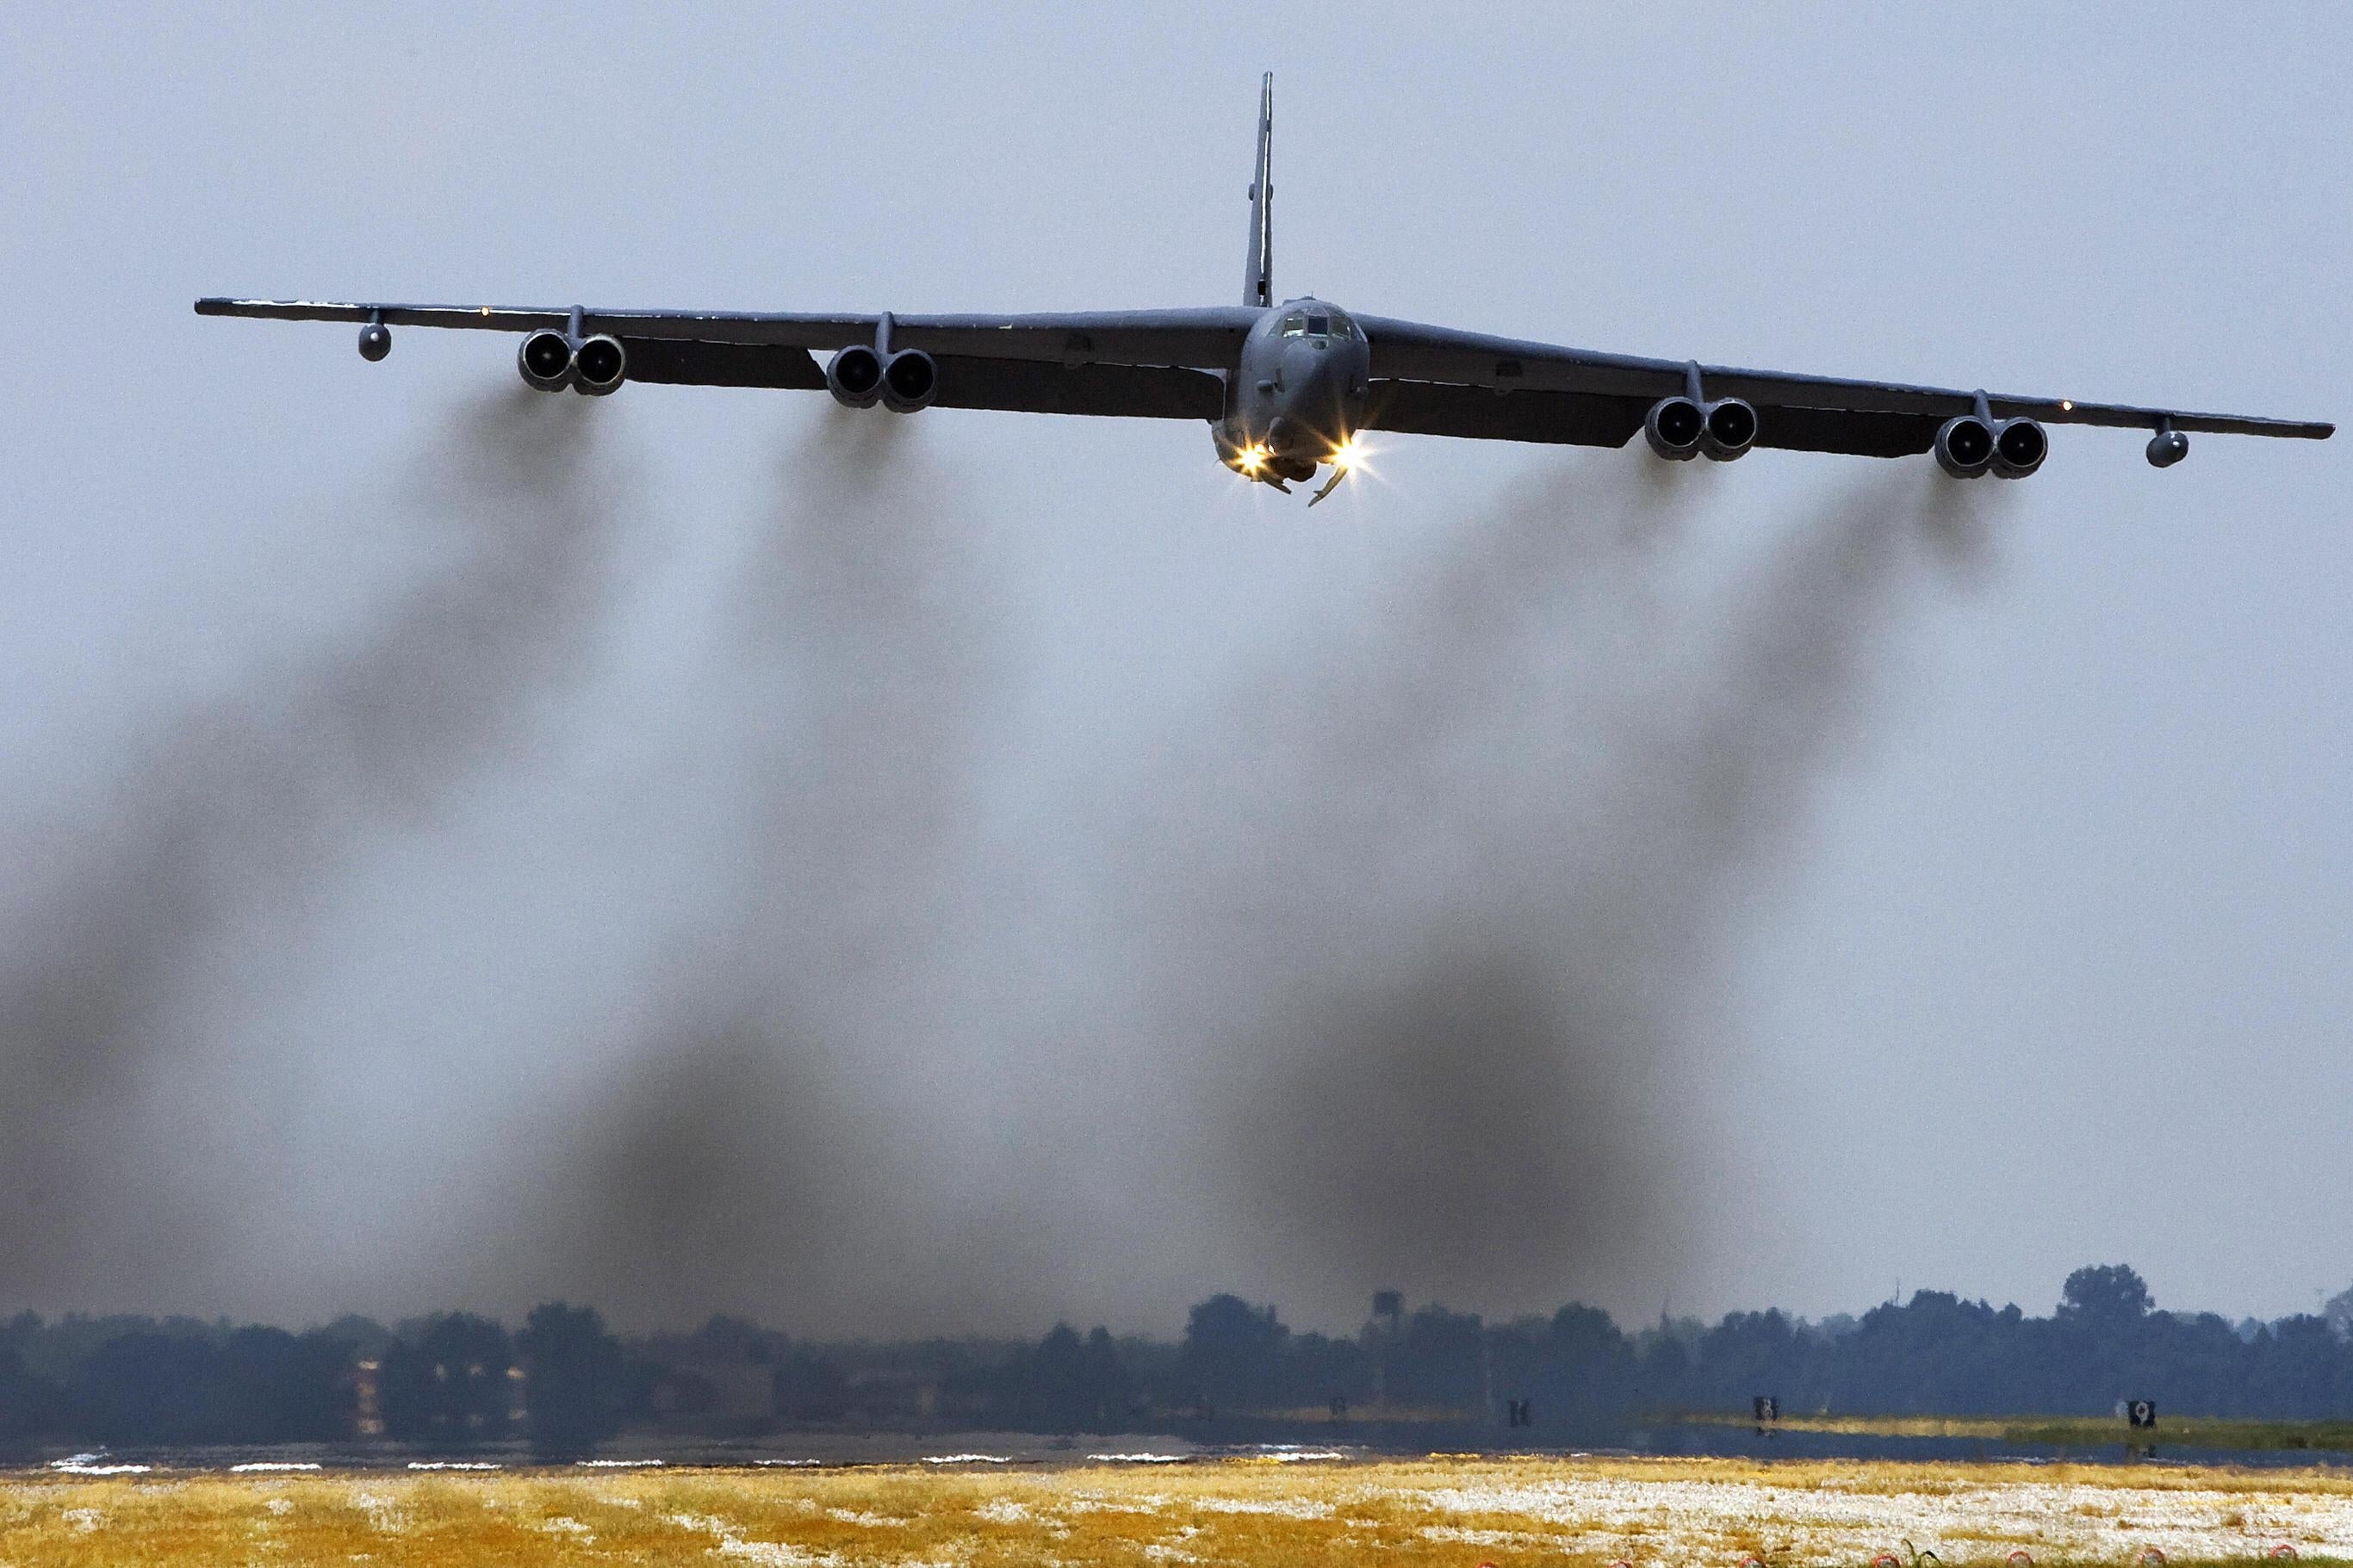 A B-52H long range bomber, part of the US Eight Air Force, 2nd Bomb Wing fleet, takes off 19 September 2007 from Barksdale Air Force Base in Louisiana.  The B-52H is the primary nuclear roled bomber in the USAF inventory. The bomber is capable of flying at high subsonic speeds at altitudes up to 50,000 feet (15,166.6 meters). It can carry nuclear or conventional ordnance with worldwide precision navigation capability.     AFP PHOTO/Paul J. Richards (Photo credit should read PAUL J. RICHARDS/AFP via Getty Images)